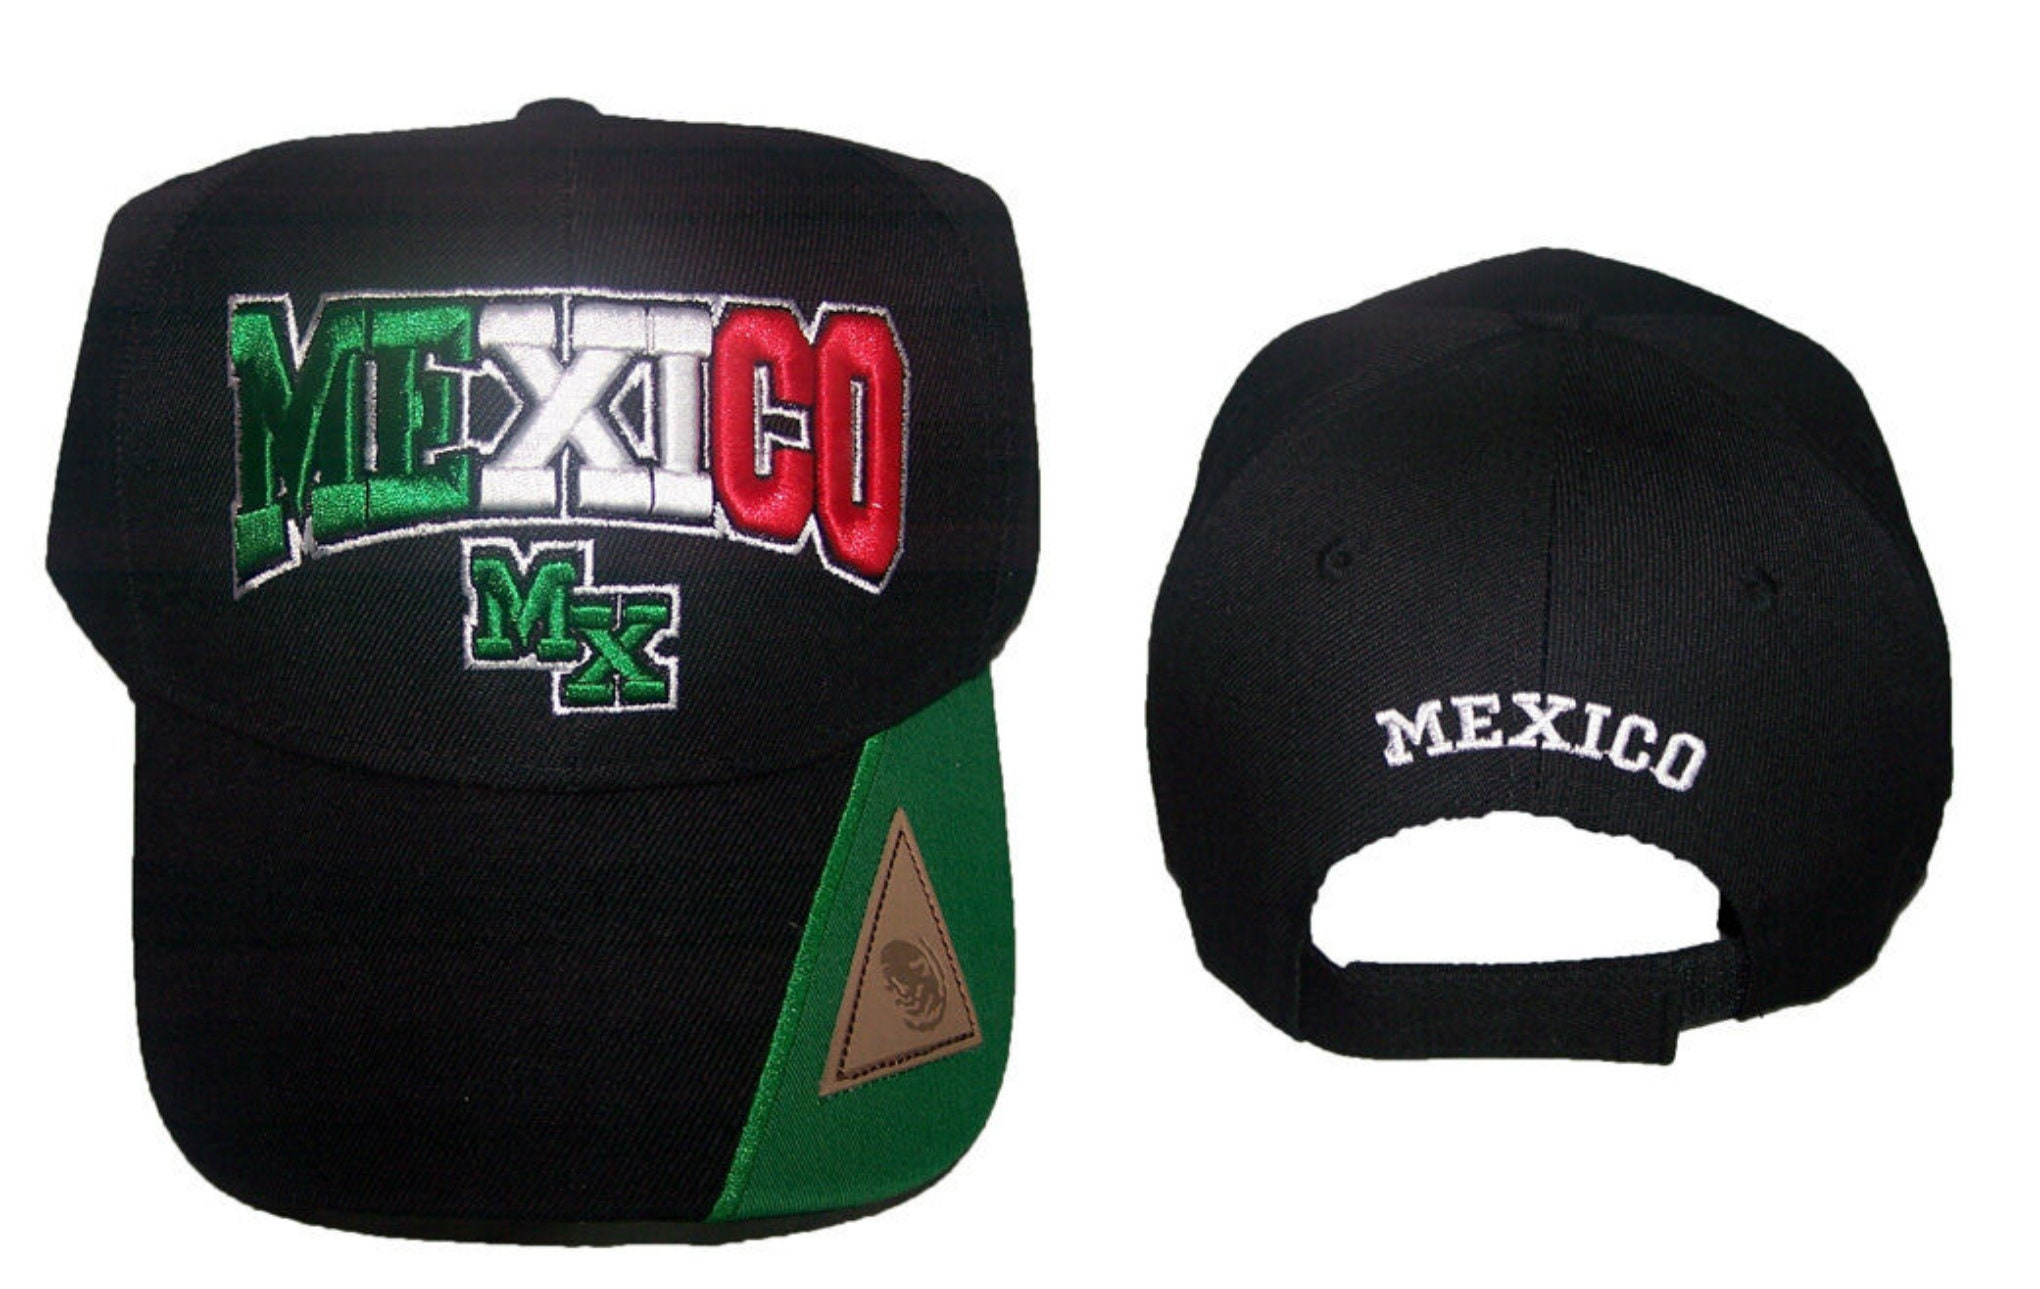 Mexico Mexican Hispanic Style Baseball Caps Hats Embroidered Etsy